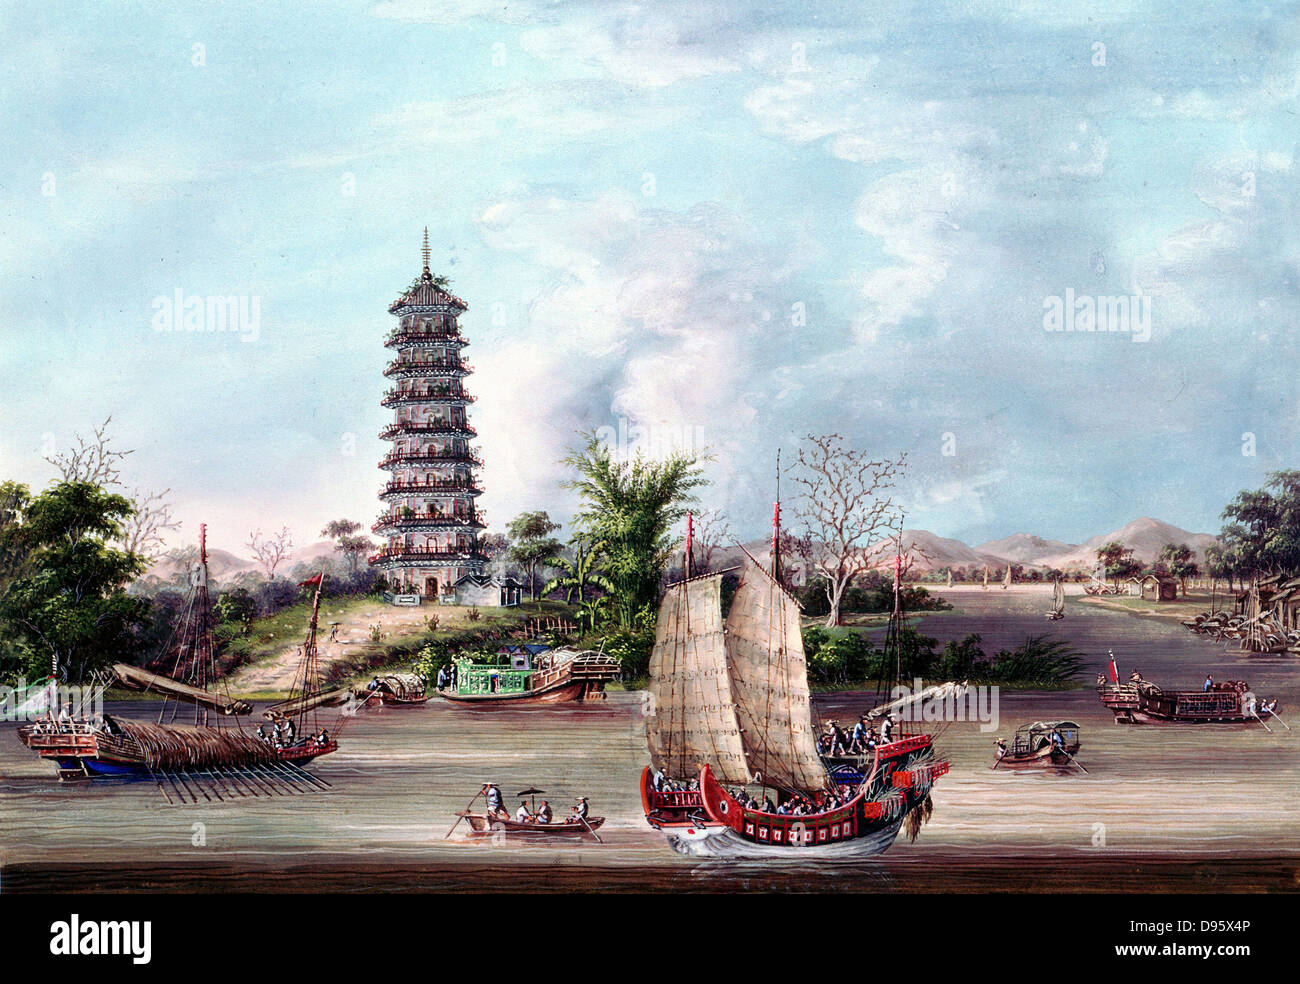 The Pagoda, Whampoa. Whampoa is to south of Canton. Treaty of Whampoa between France and China, one of the treaties forced on China at end of First Opium war (1839-42) conceding Treaty Ports to European powers. Canton was one of these ports. Stock Photo